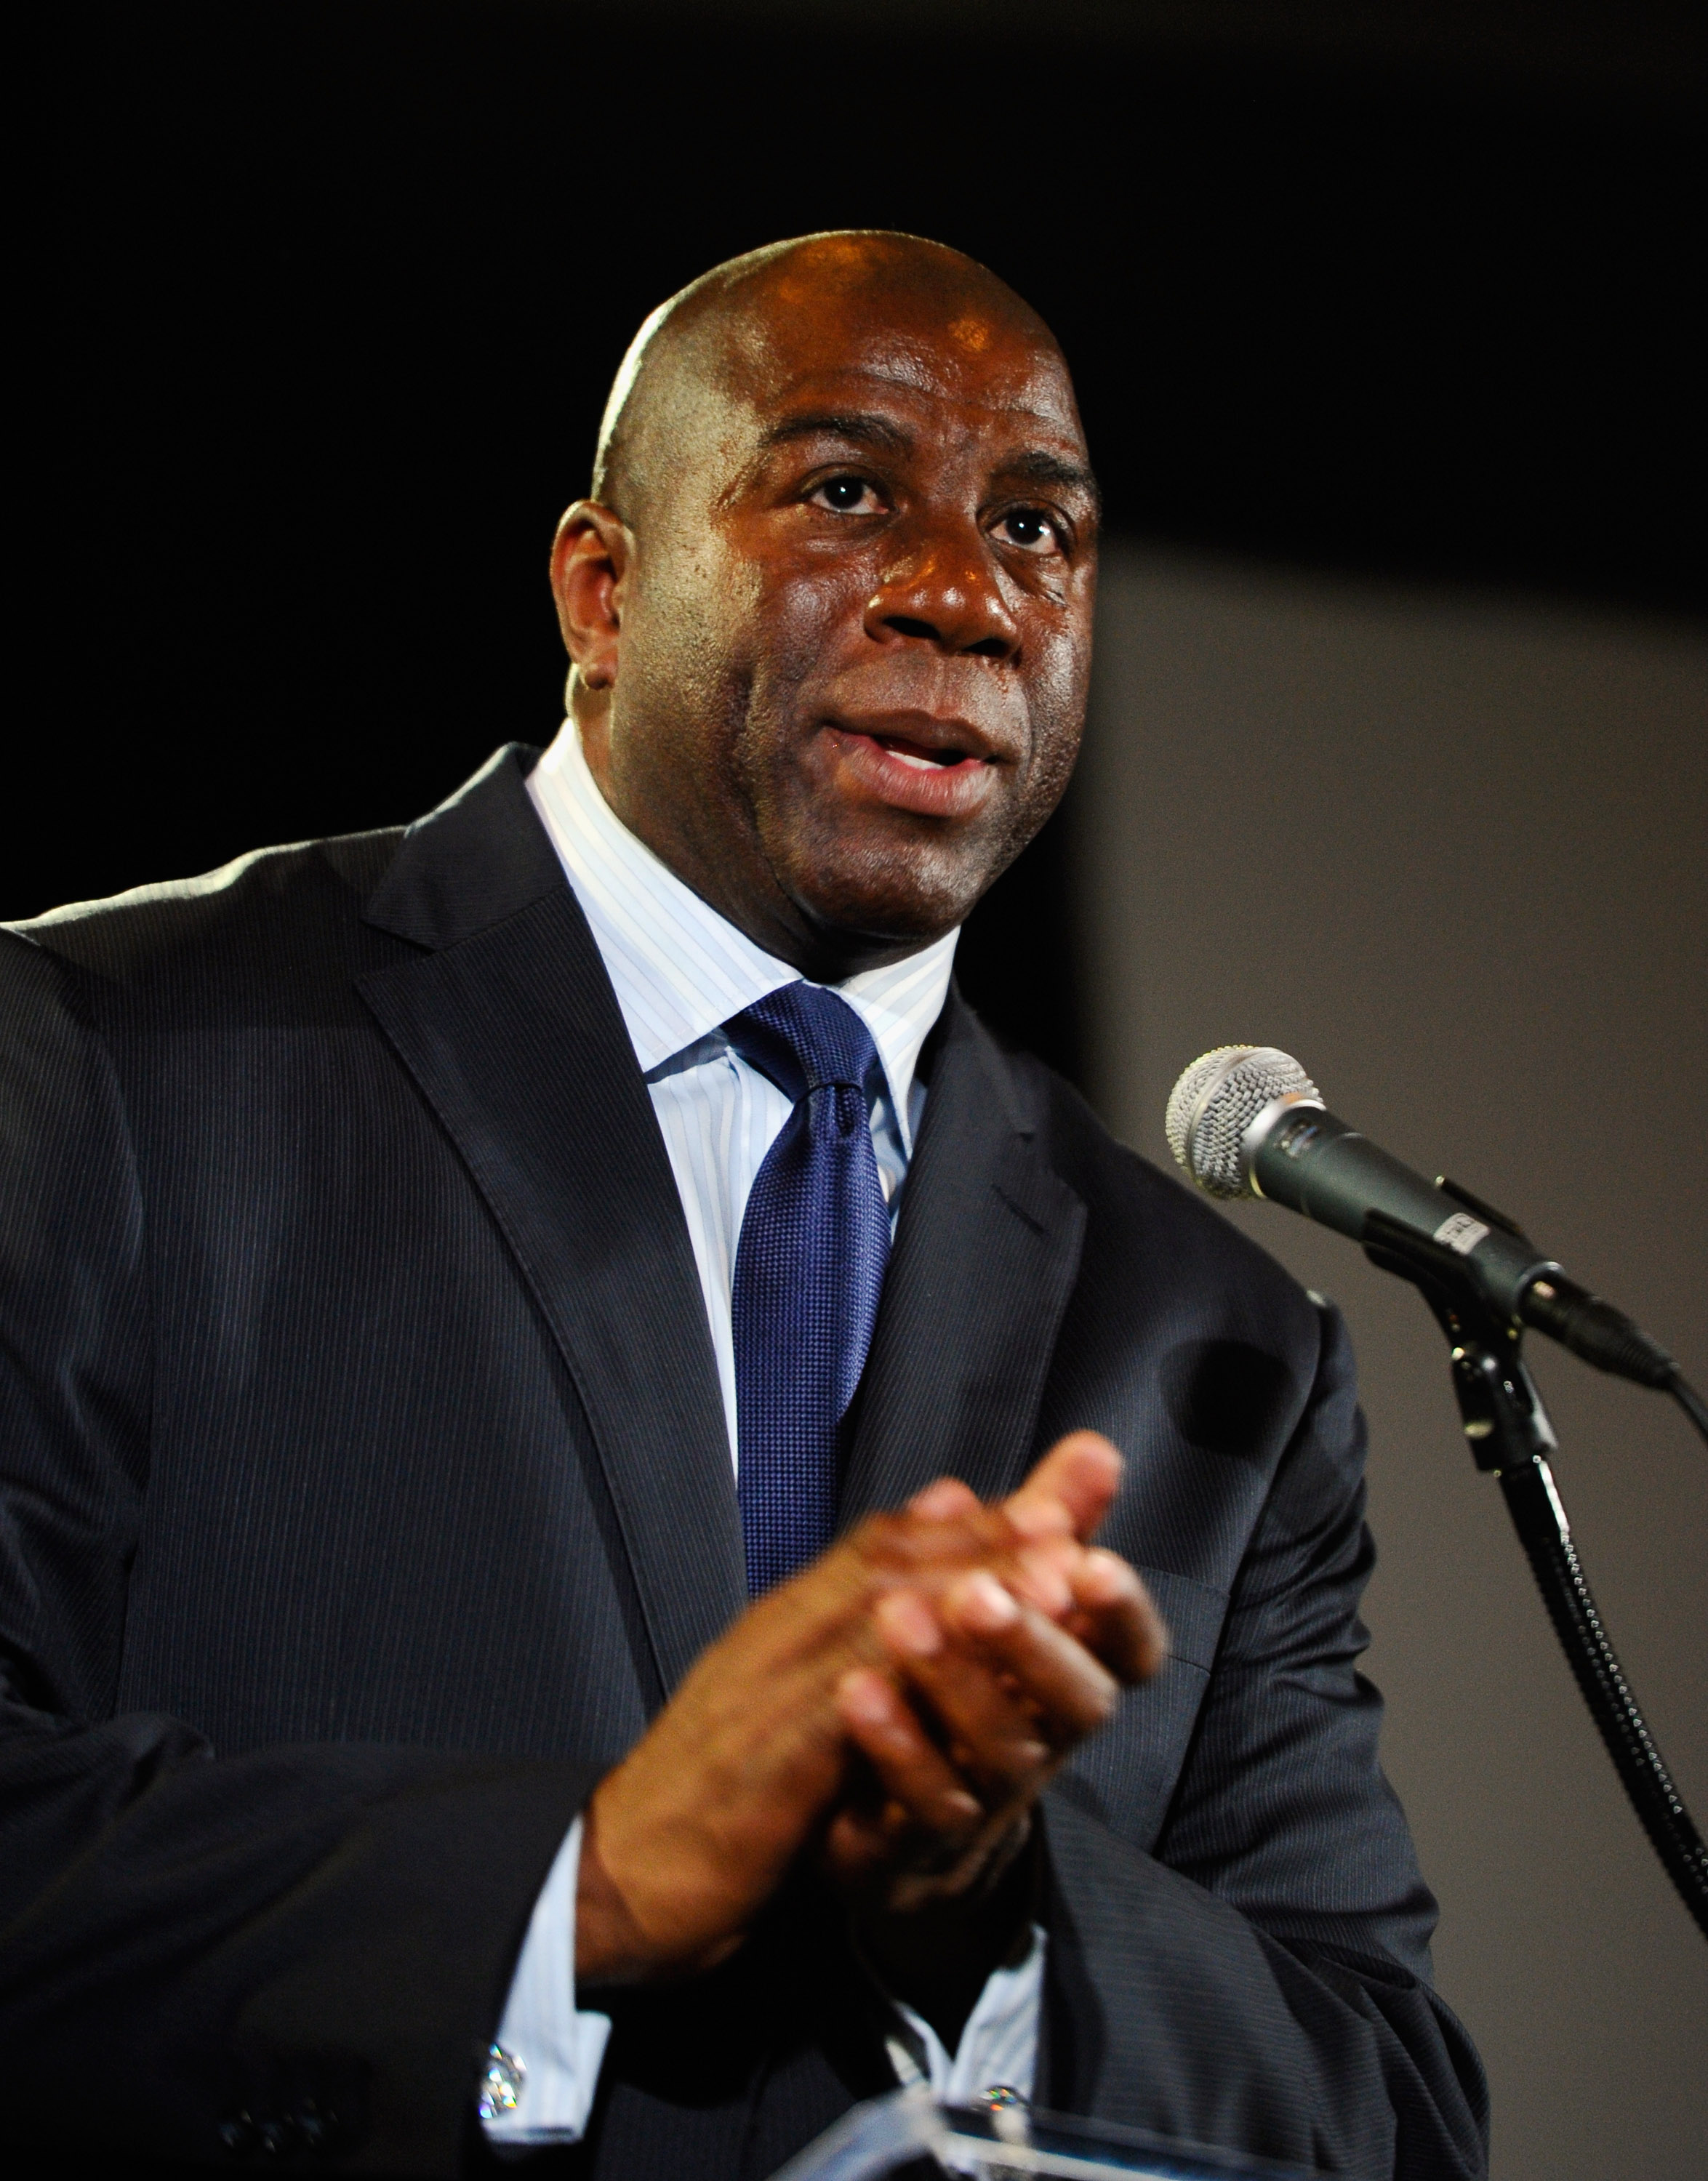 LOS ANGELES, CA - FEBRUARY 01:  Los Angeles Lakers basketball great Magic Johnson speaks during an event announcing naming rights for the new football stadium Farmers Field at Los Angeles Convention Center on February 1, 2011 in Los Angeles, California. A